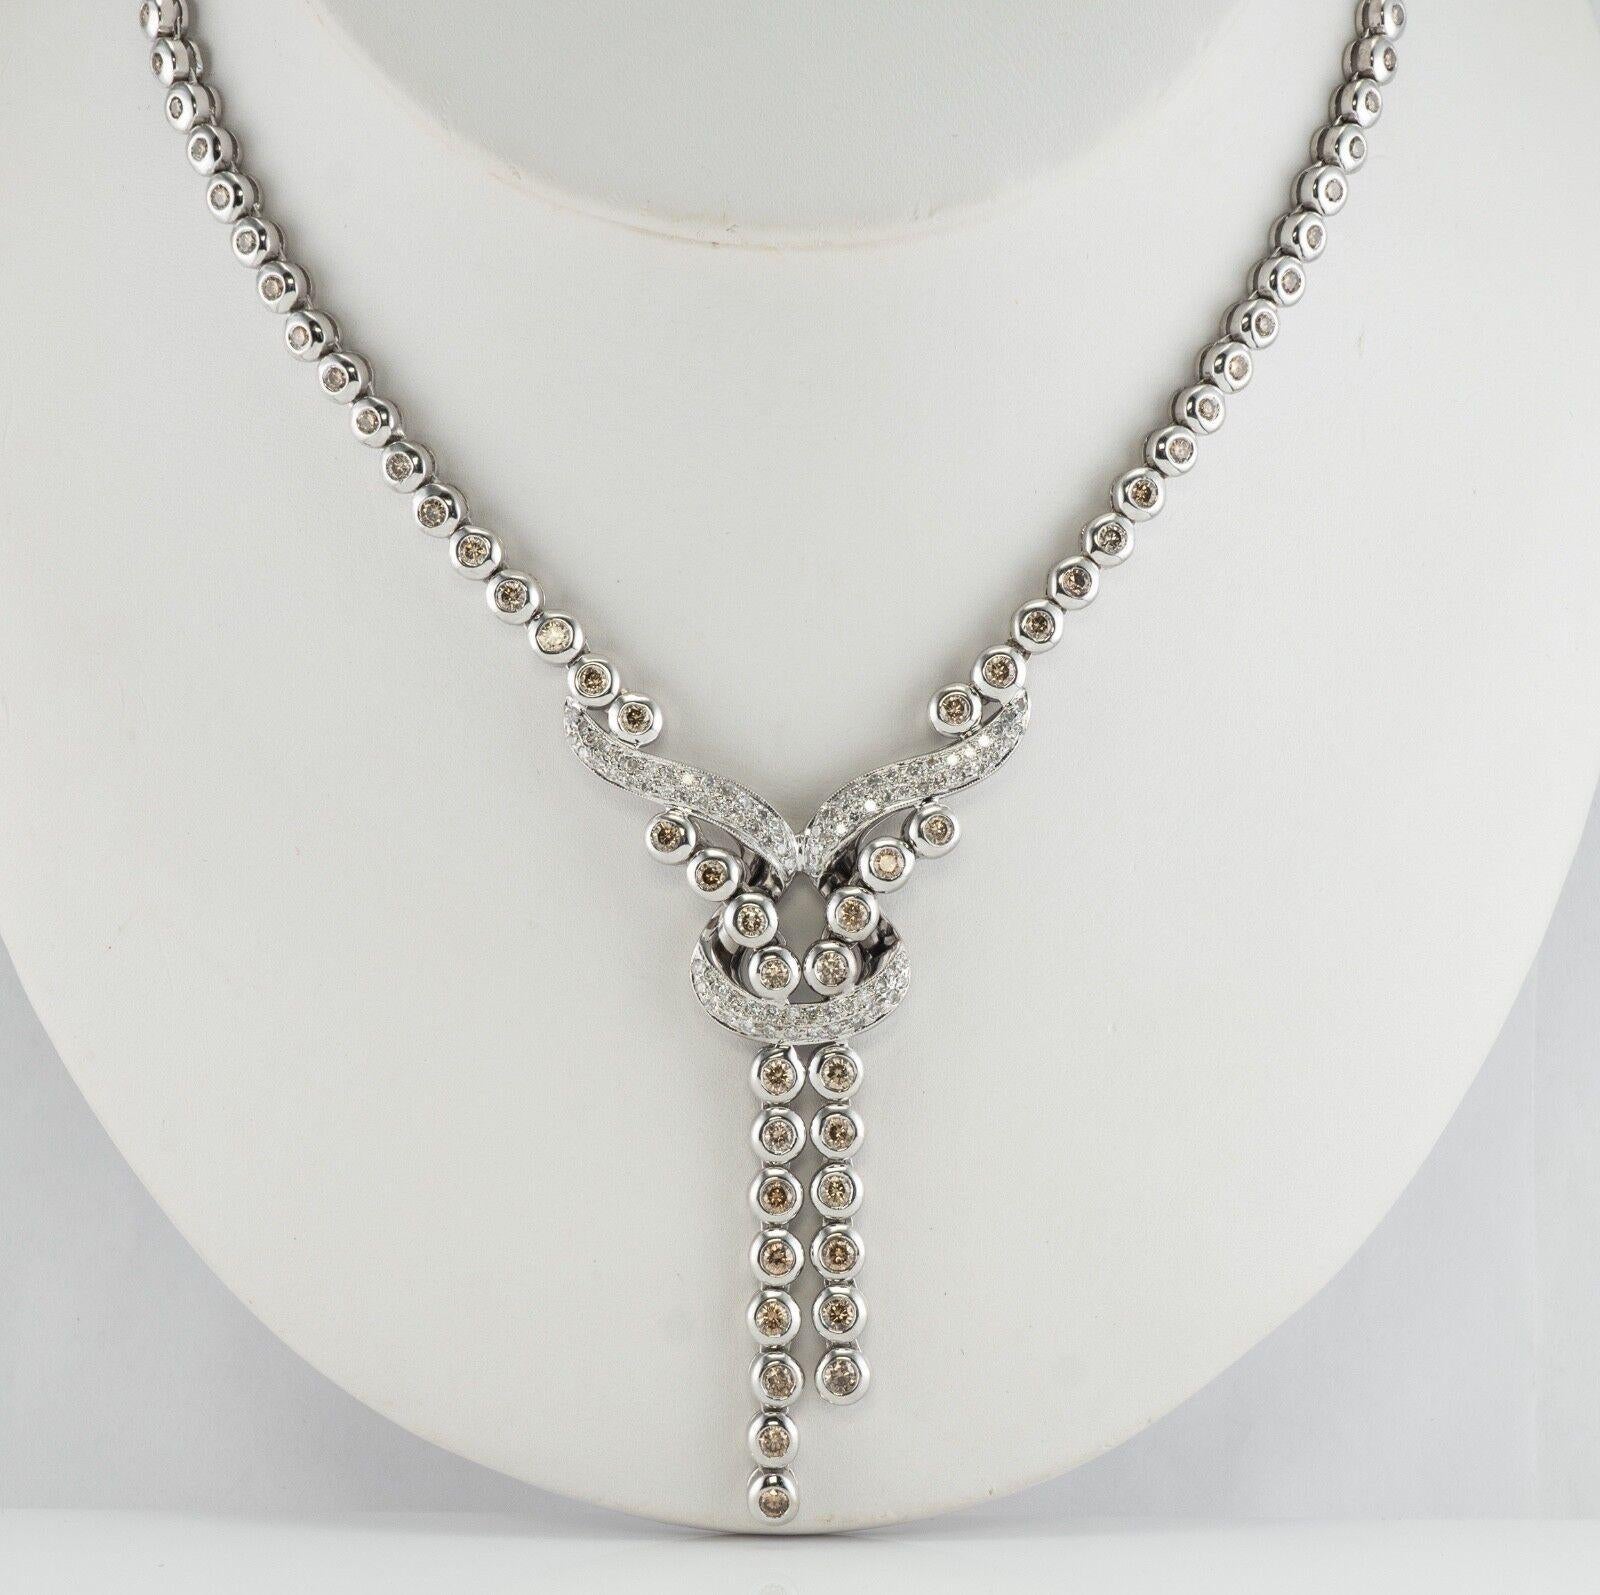 White & Champagne Diamond Necklace 18K Gold 3.84 TDW

We were so lucky to take advantage of a jewelry store close out, and I am so happy to offer this gorgeous necklace for the fraction of retail price, which is $7400 (the tag is still